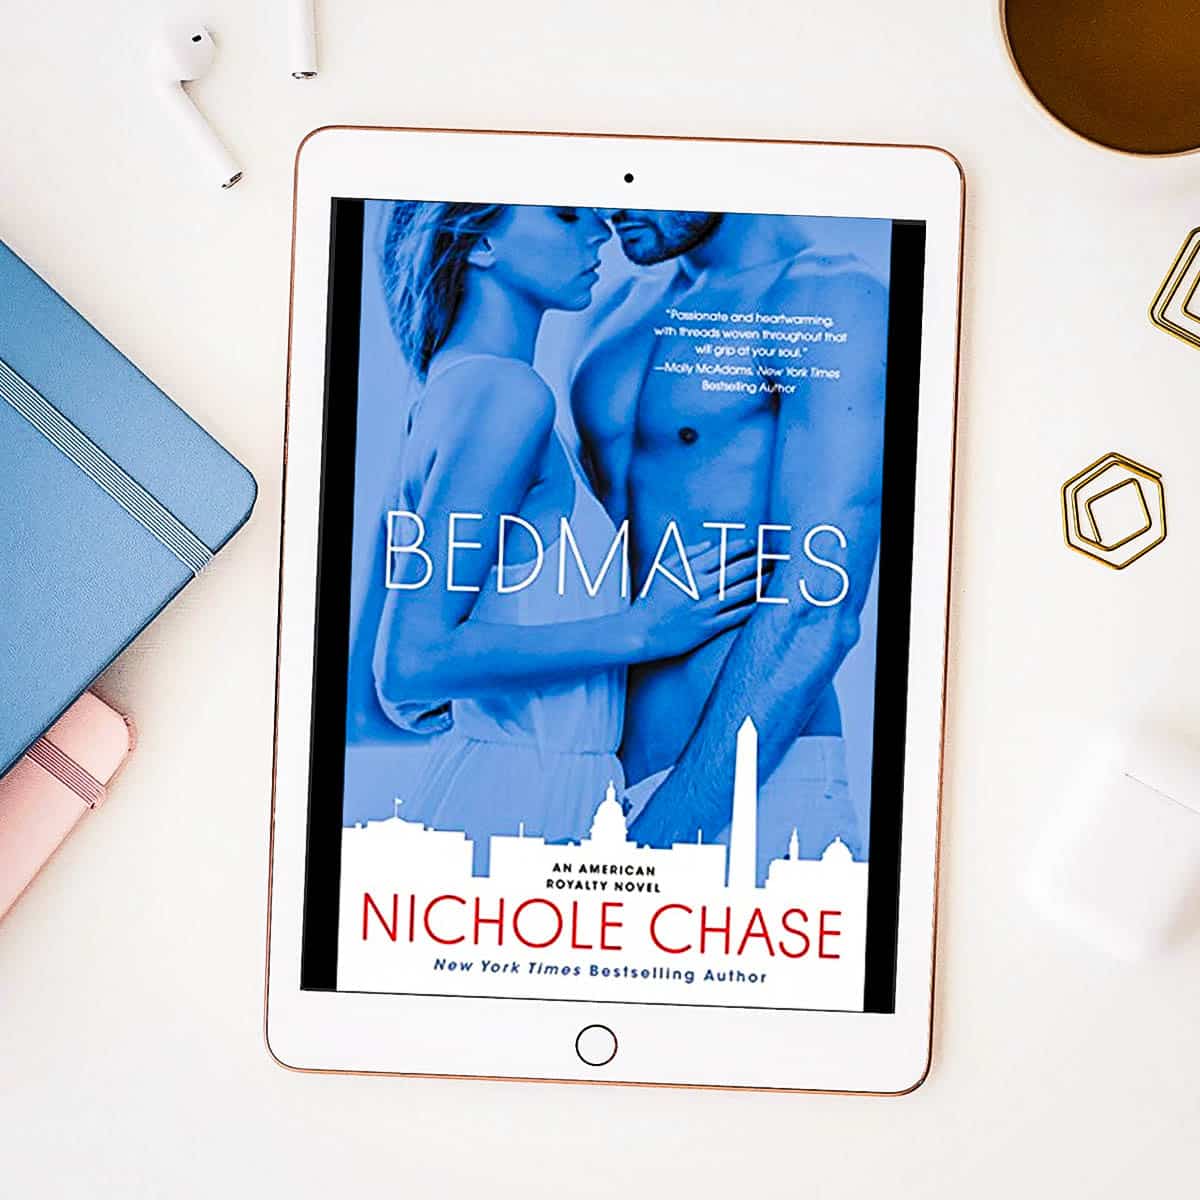 Take an enemies-to-lovers romance, throw in a dash of a forbidden relationship, add wounded veterans and an adorable dog, and you have Bedmates by Nichole Chase